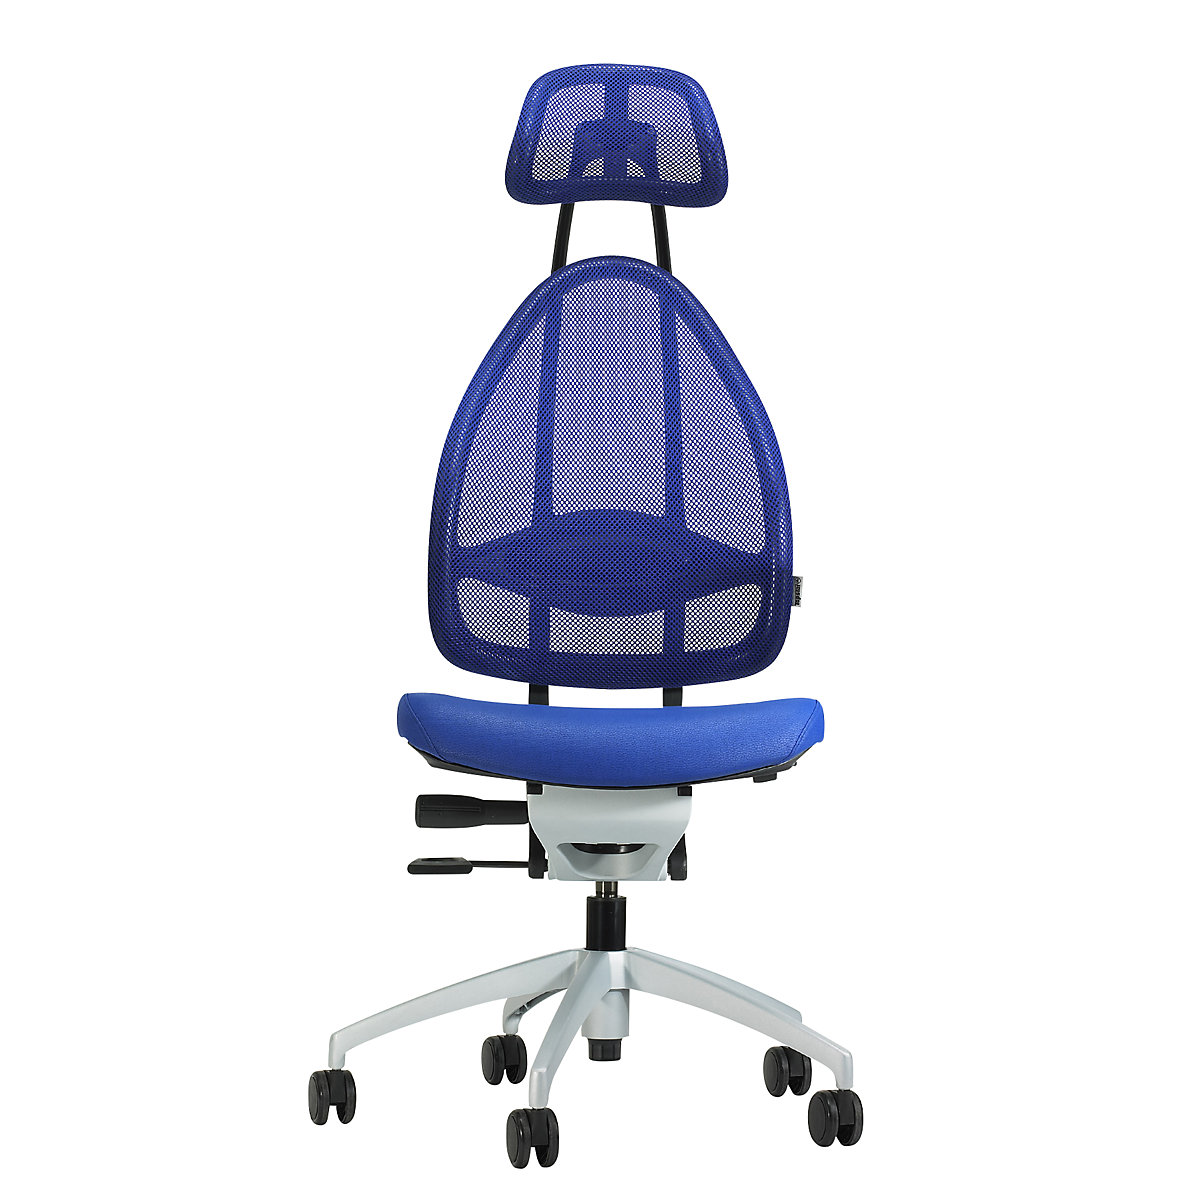 Designer office swivel chair, with head rest and mesh back rest – Topstar, effective back rest height 830 mm, royal blue-4